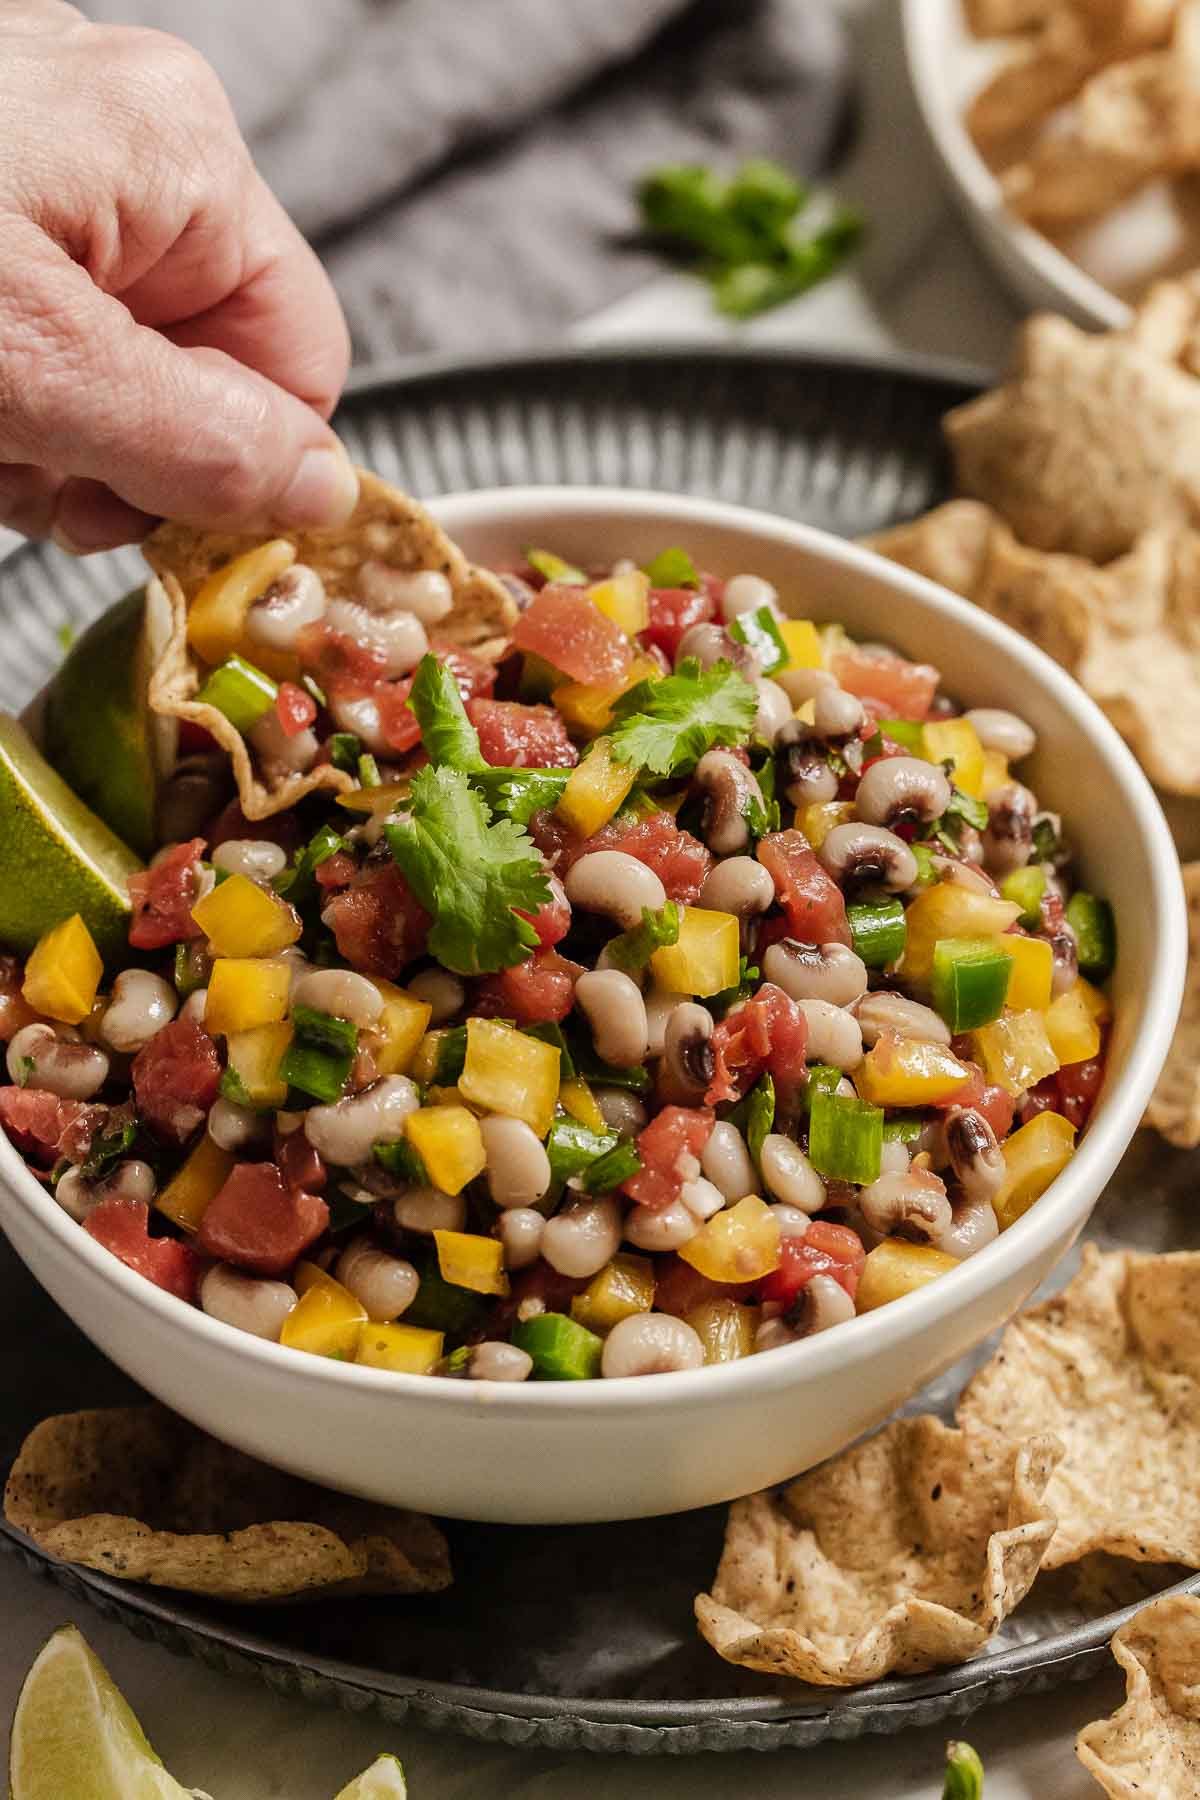 Hand scooping up Texas Caviar onto a bowl shaped chip.